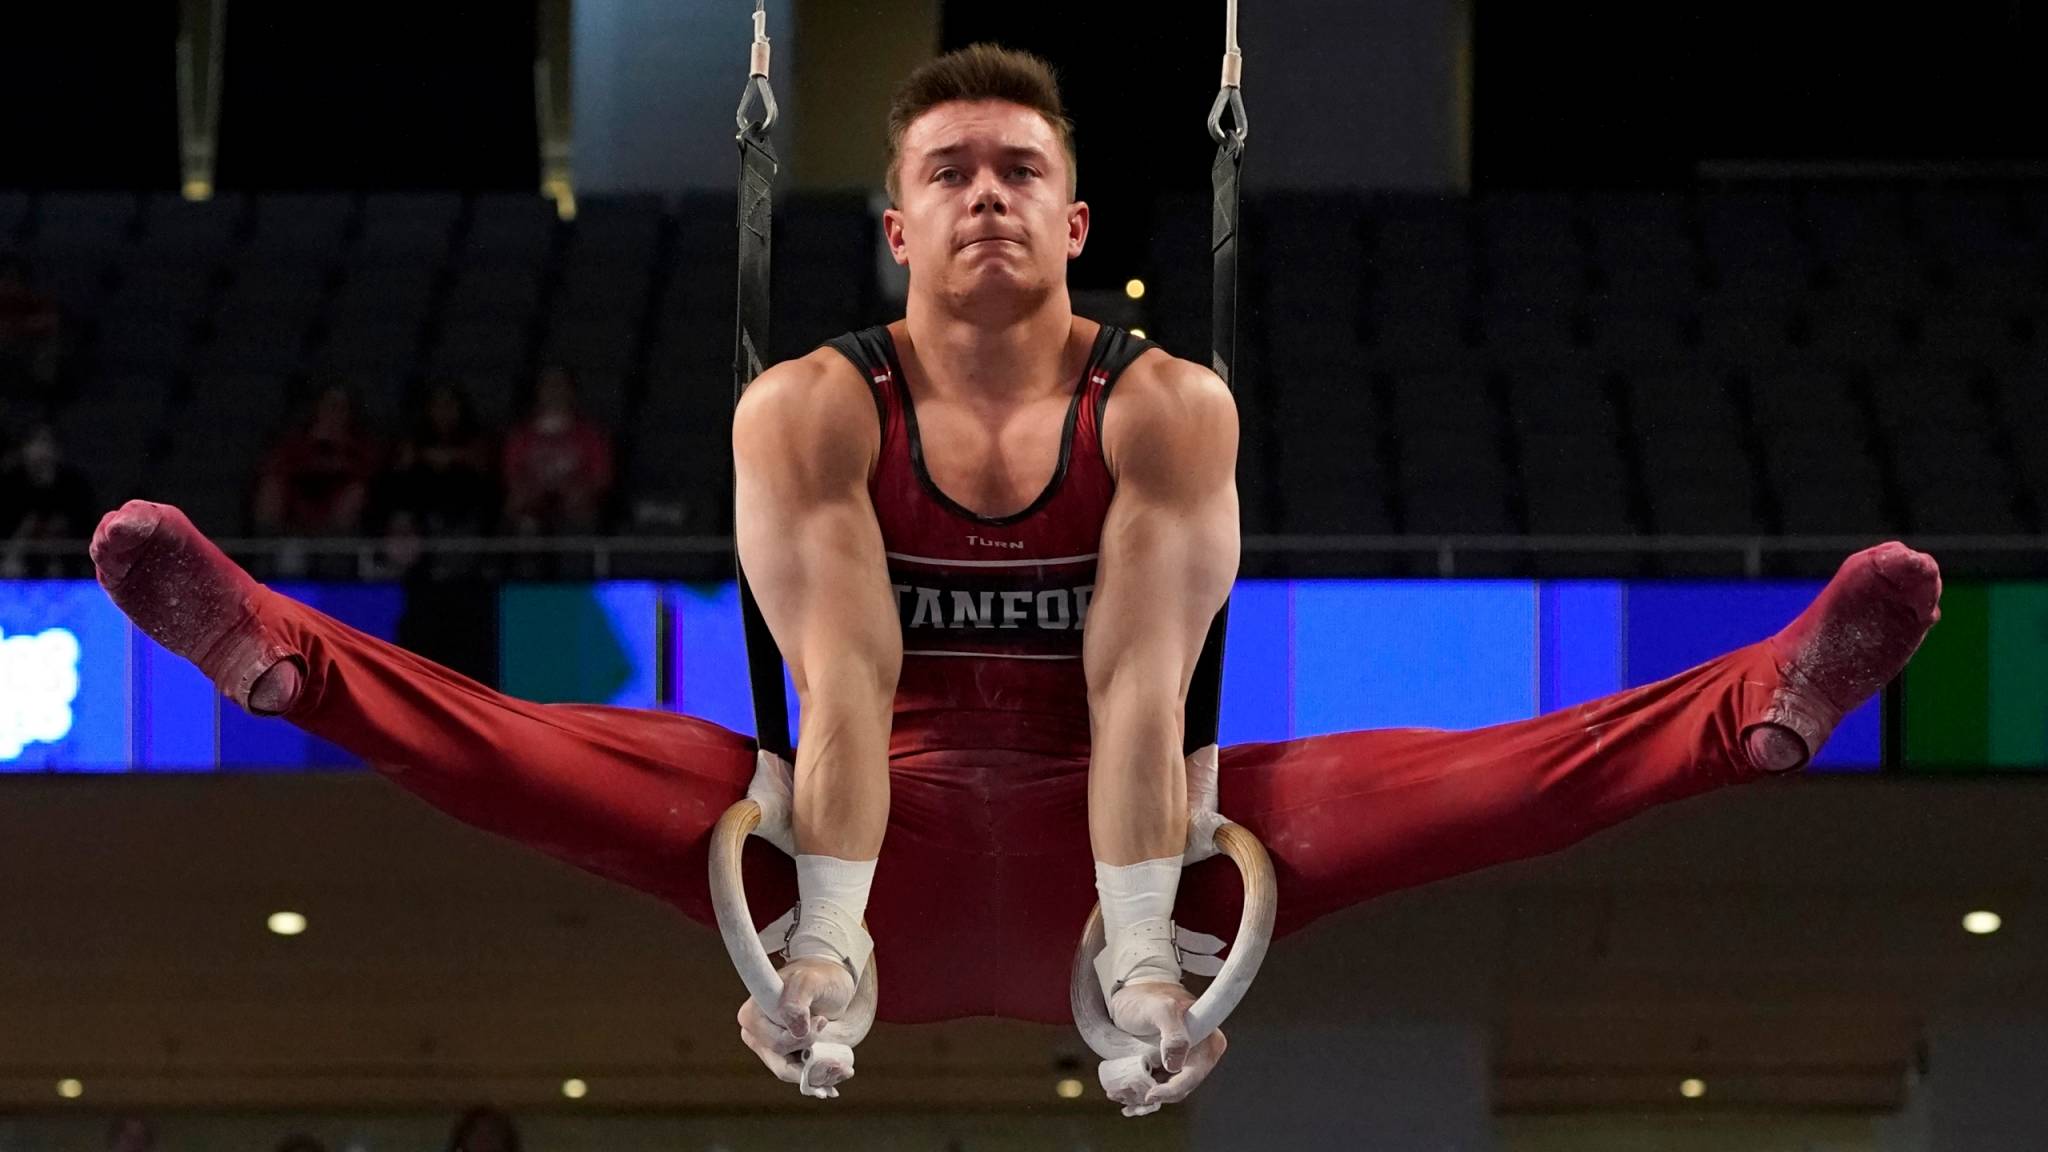 How to watch Brody Malone at the U.S. Olympic Gymnastics Trials